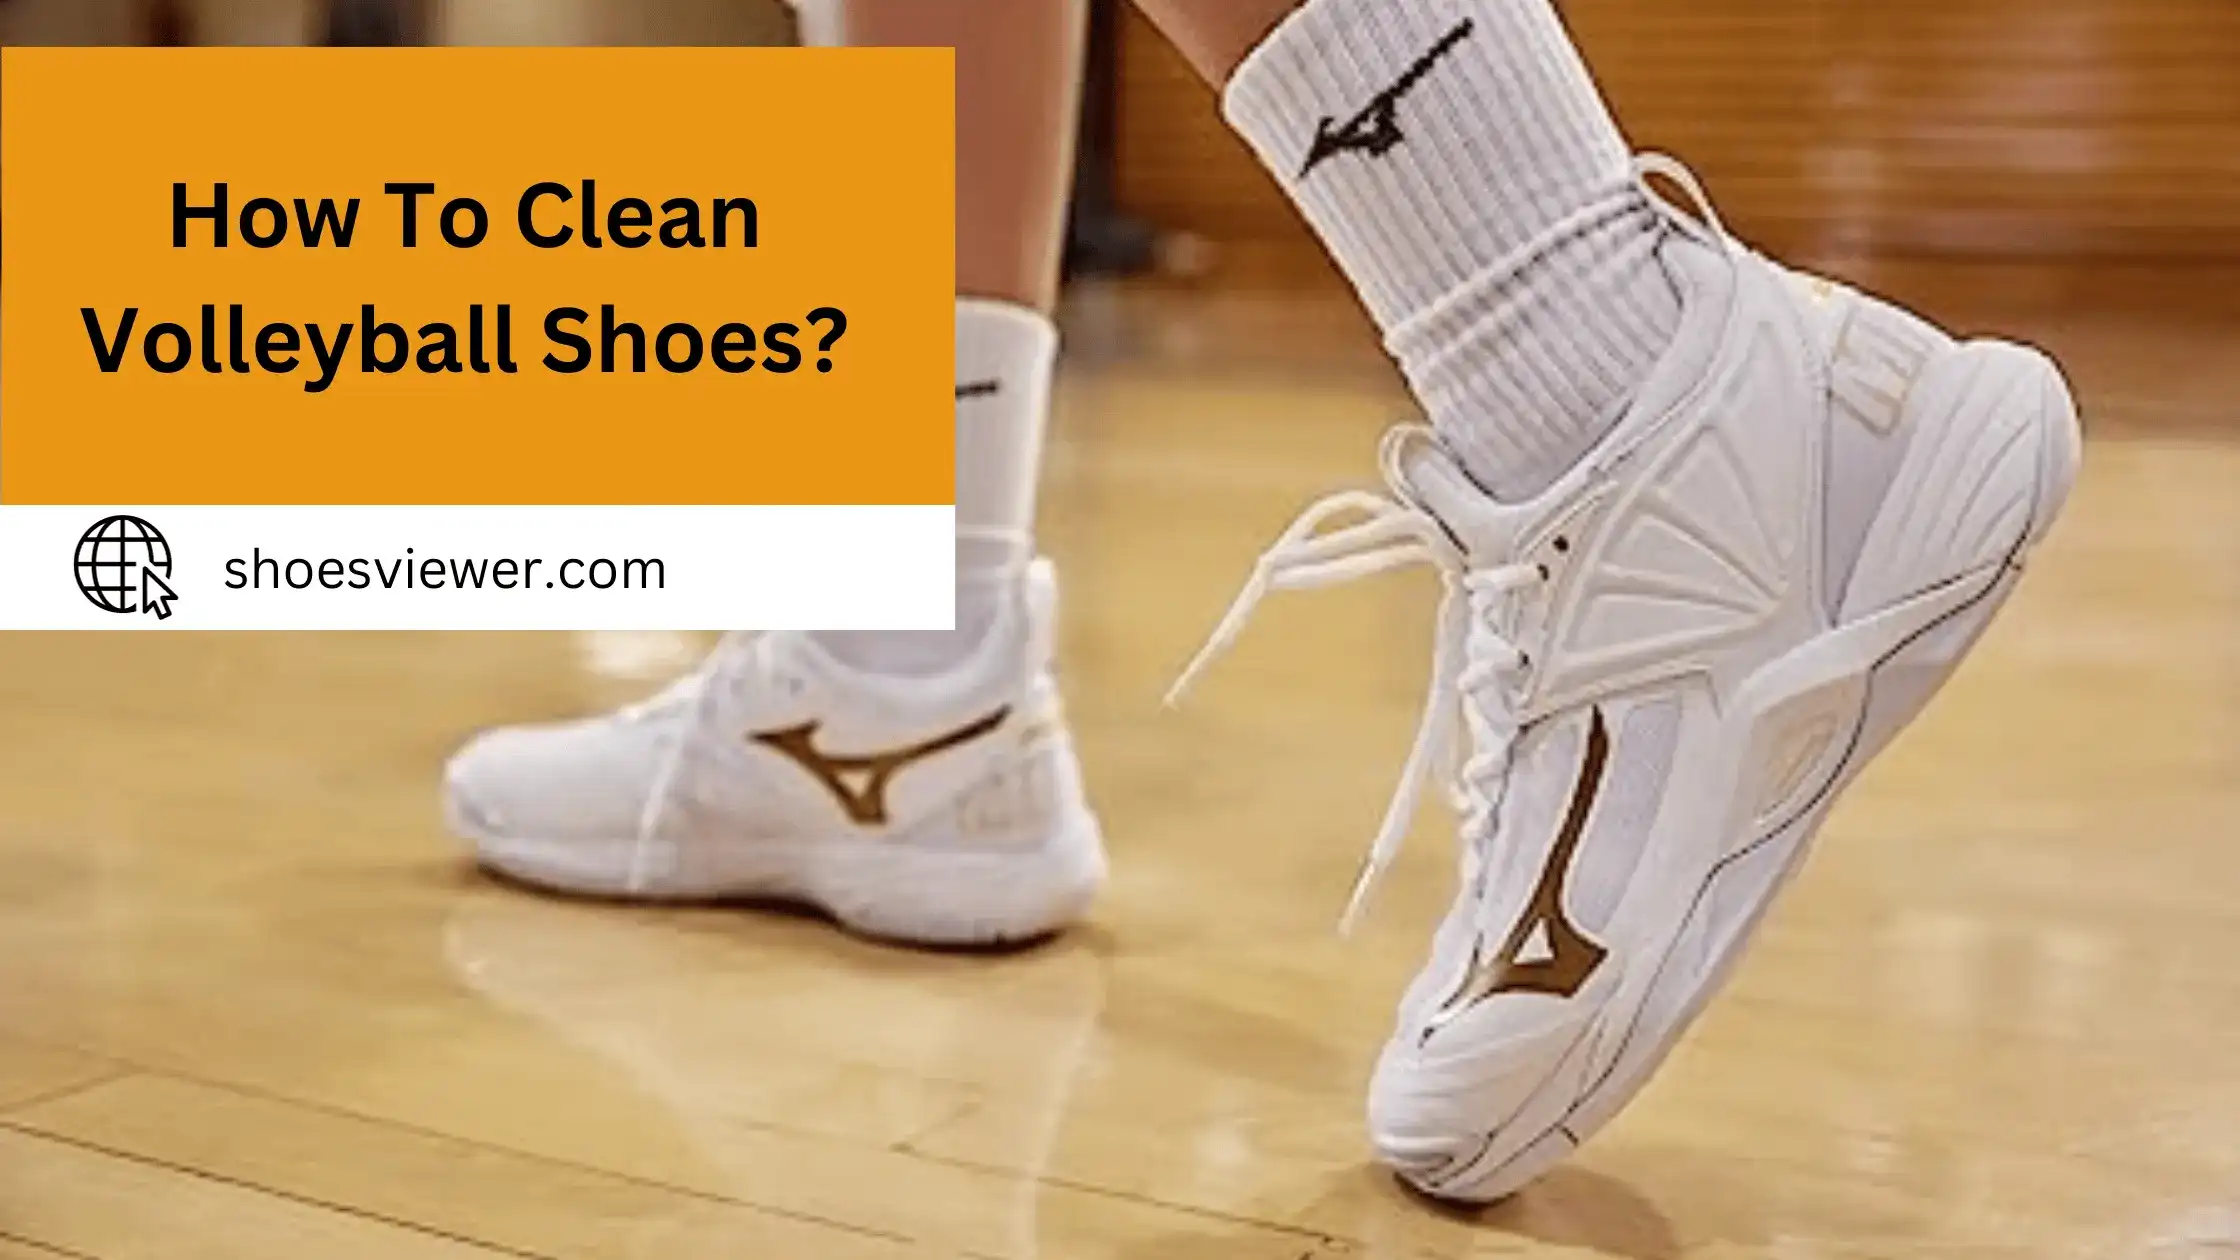 How To Clean Volleyball Shoes? Cleaning Instructions